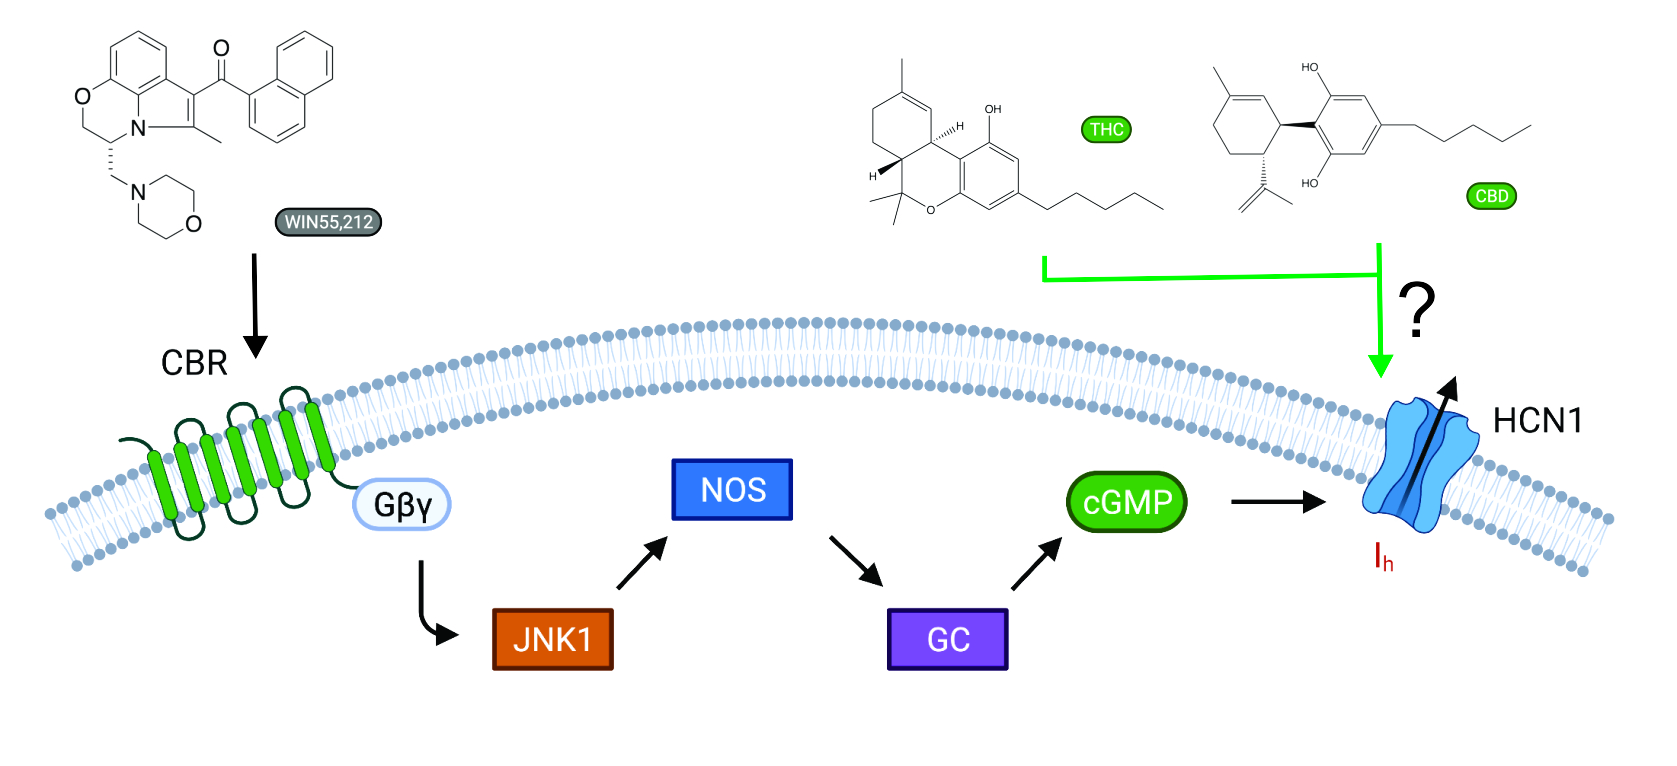 Direct Regulation of Hyperpolarization-Activated Cyclic-Nucleotide Gated (HCN1) Channels by Cannabinoids.